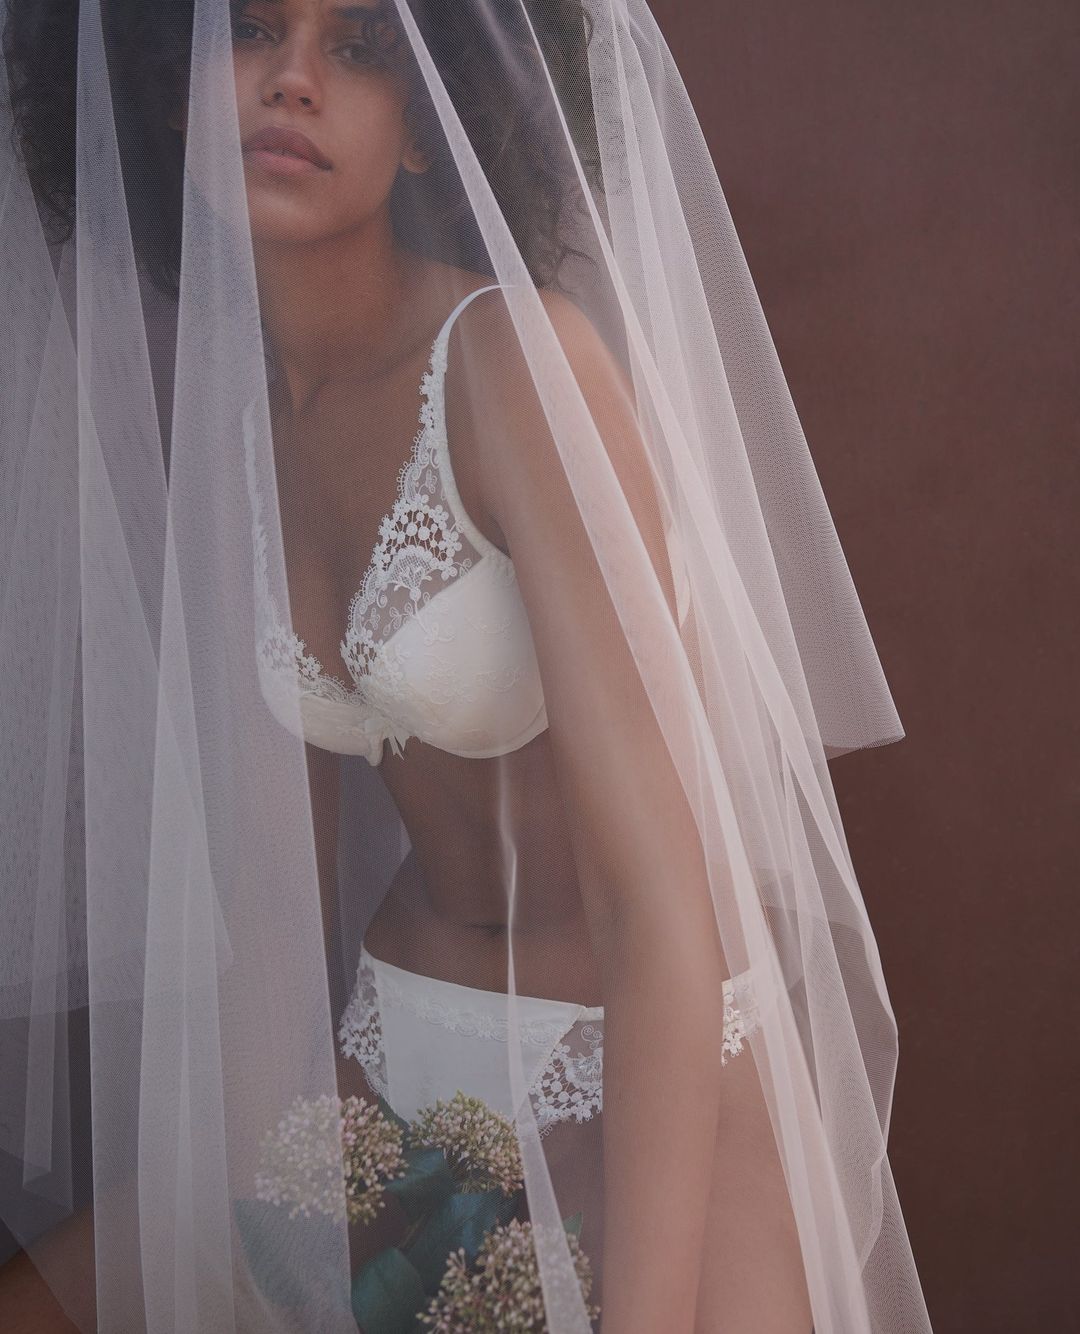 Bridal collection - Bridal lingerie and accessories